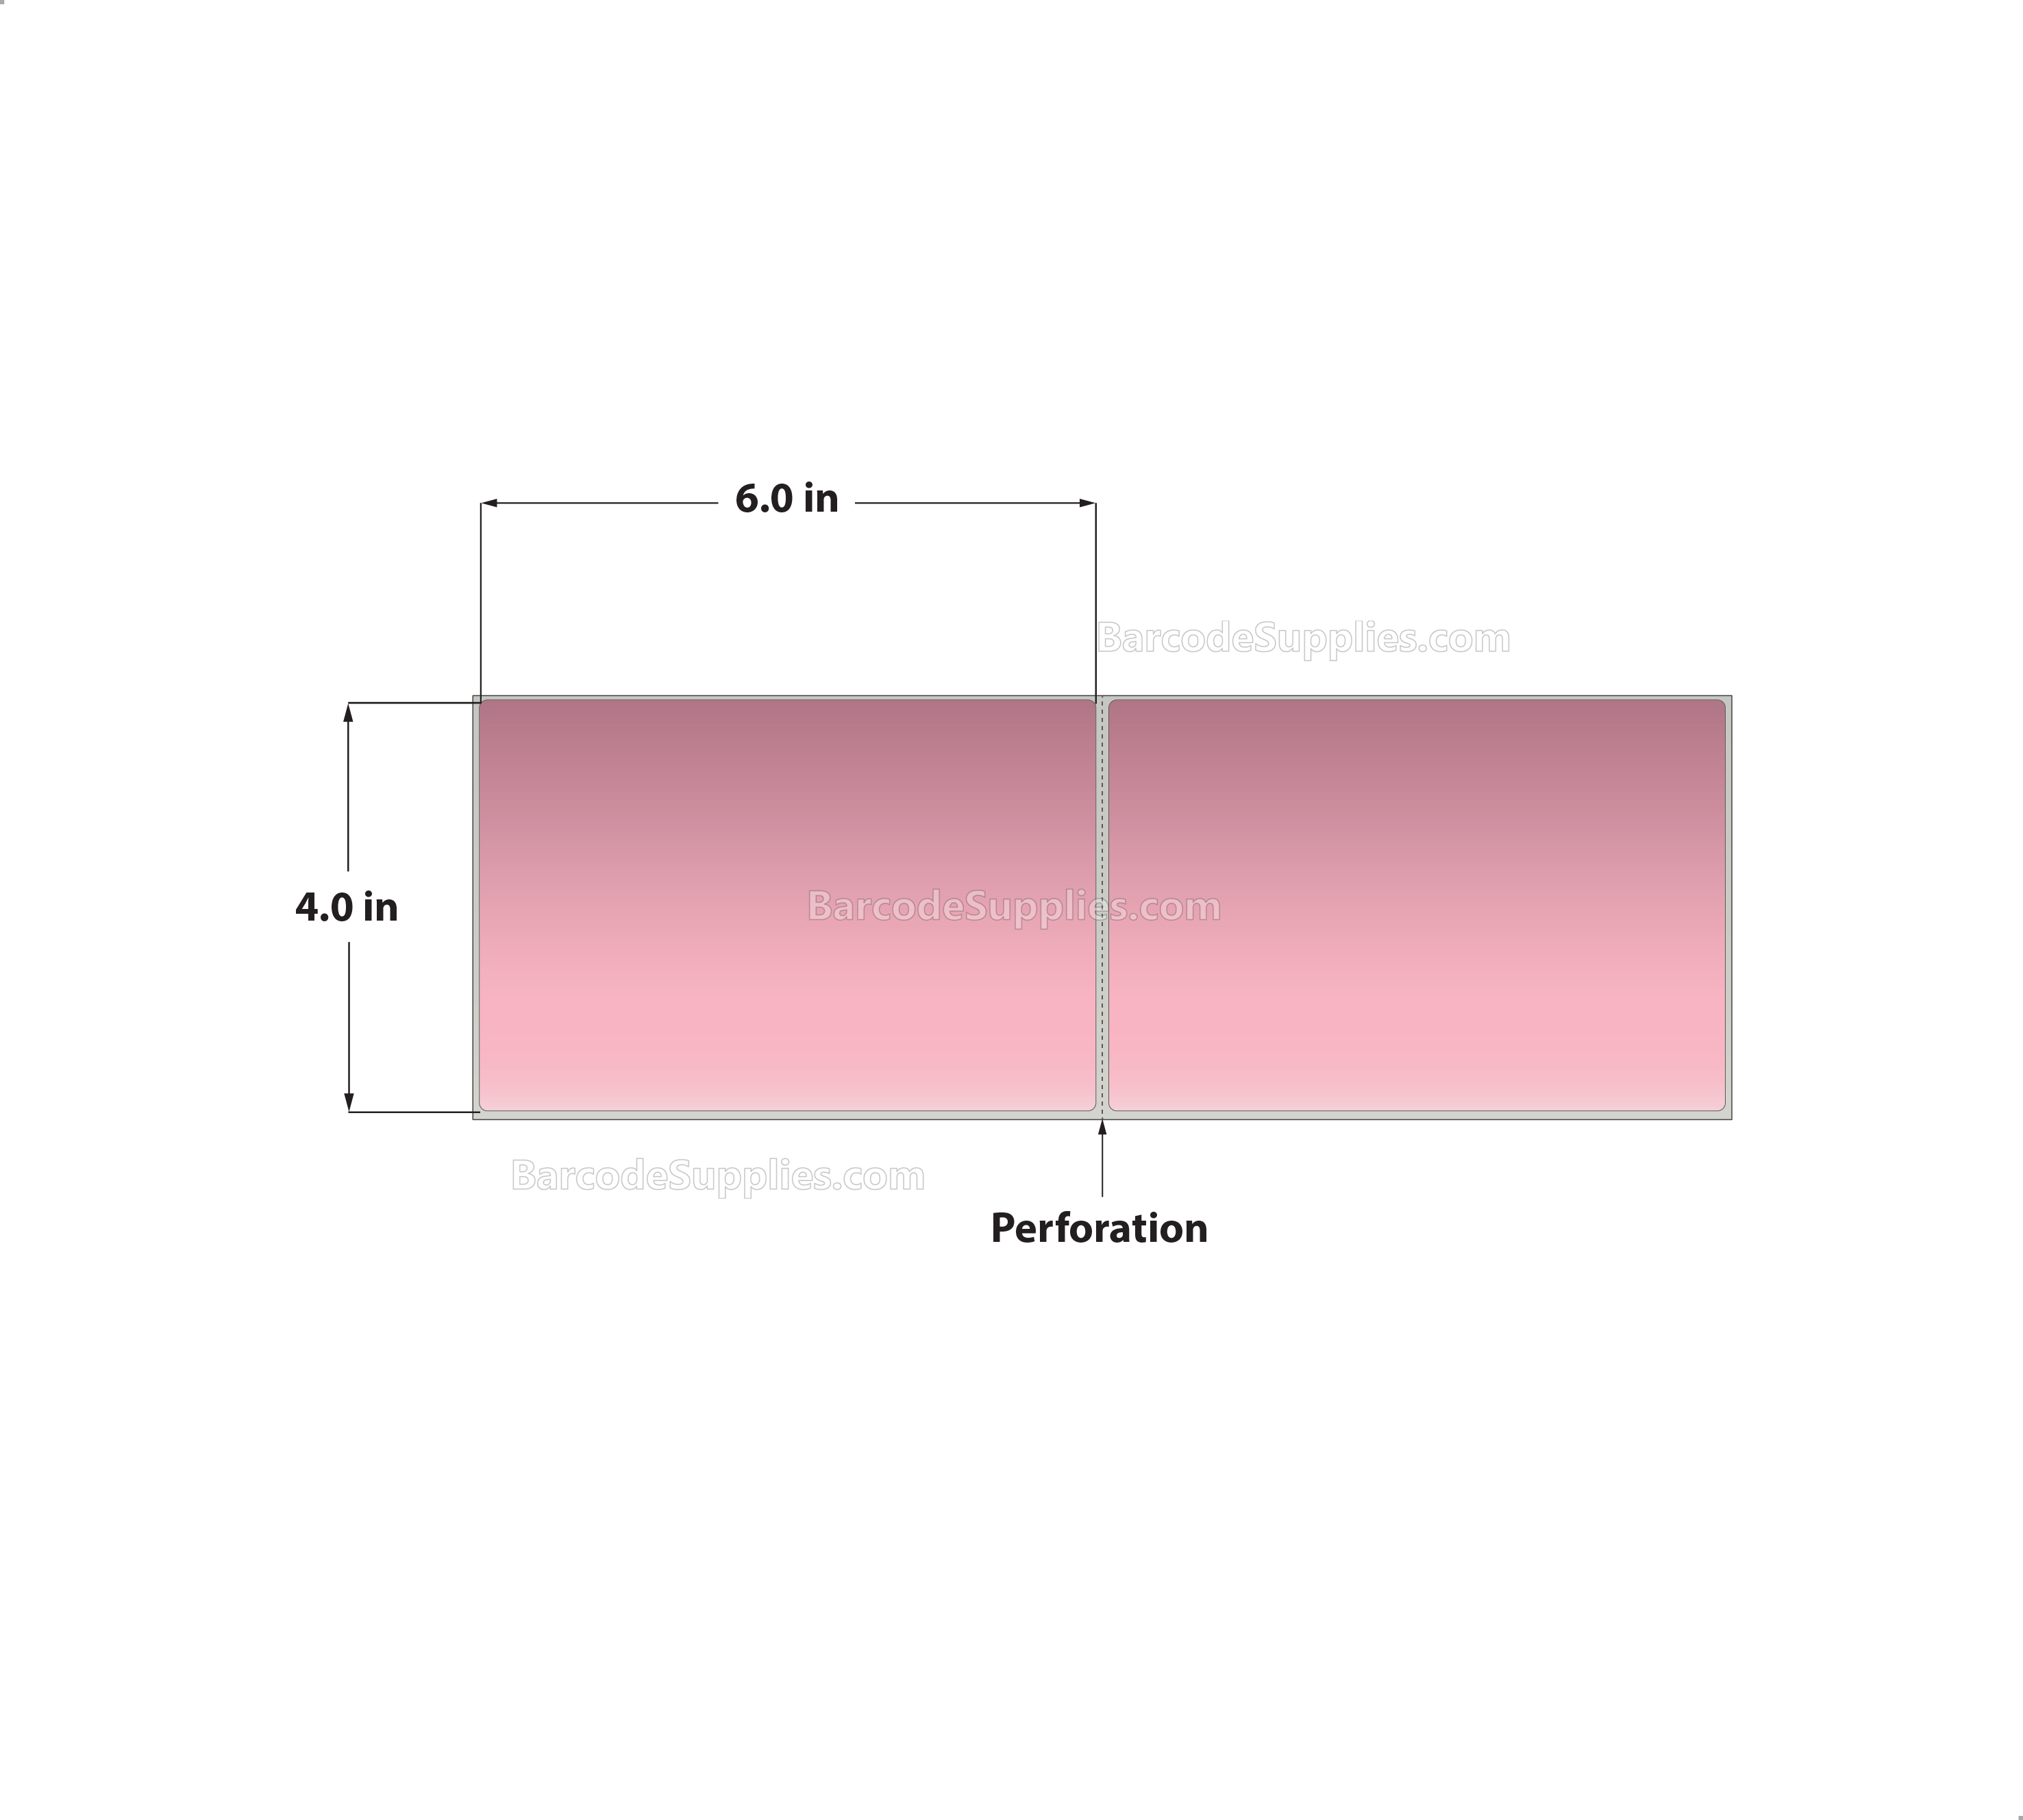 4 x 6 Thermal Transfer 196 PInk Labels With Permanent Acrylic Adhesive - Perforated - 2000 Labels Per Stack - Carton Of 2 Stacks - 4000 Labels Total - MPN: THF46-1PP